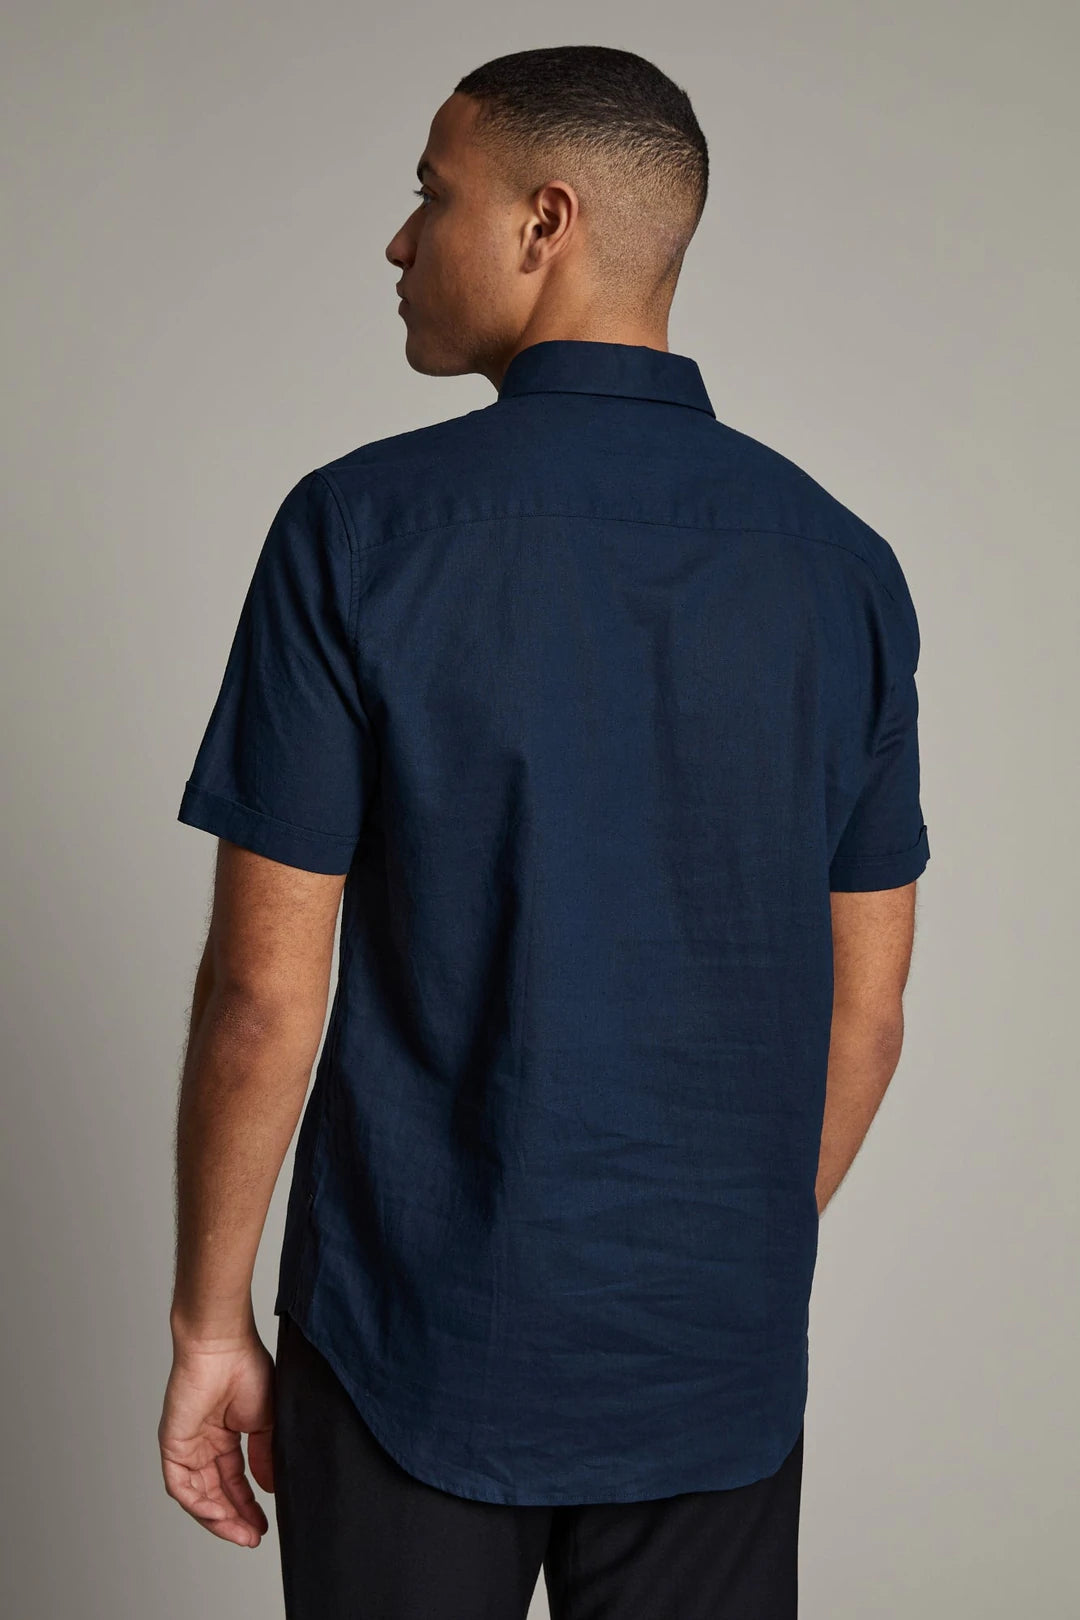 Matinique Short Sleeve Shirt in Navy color F.